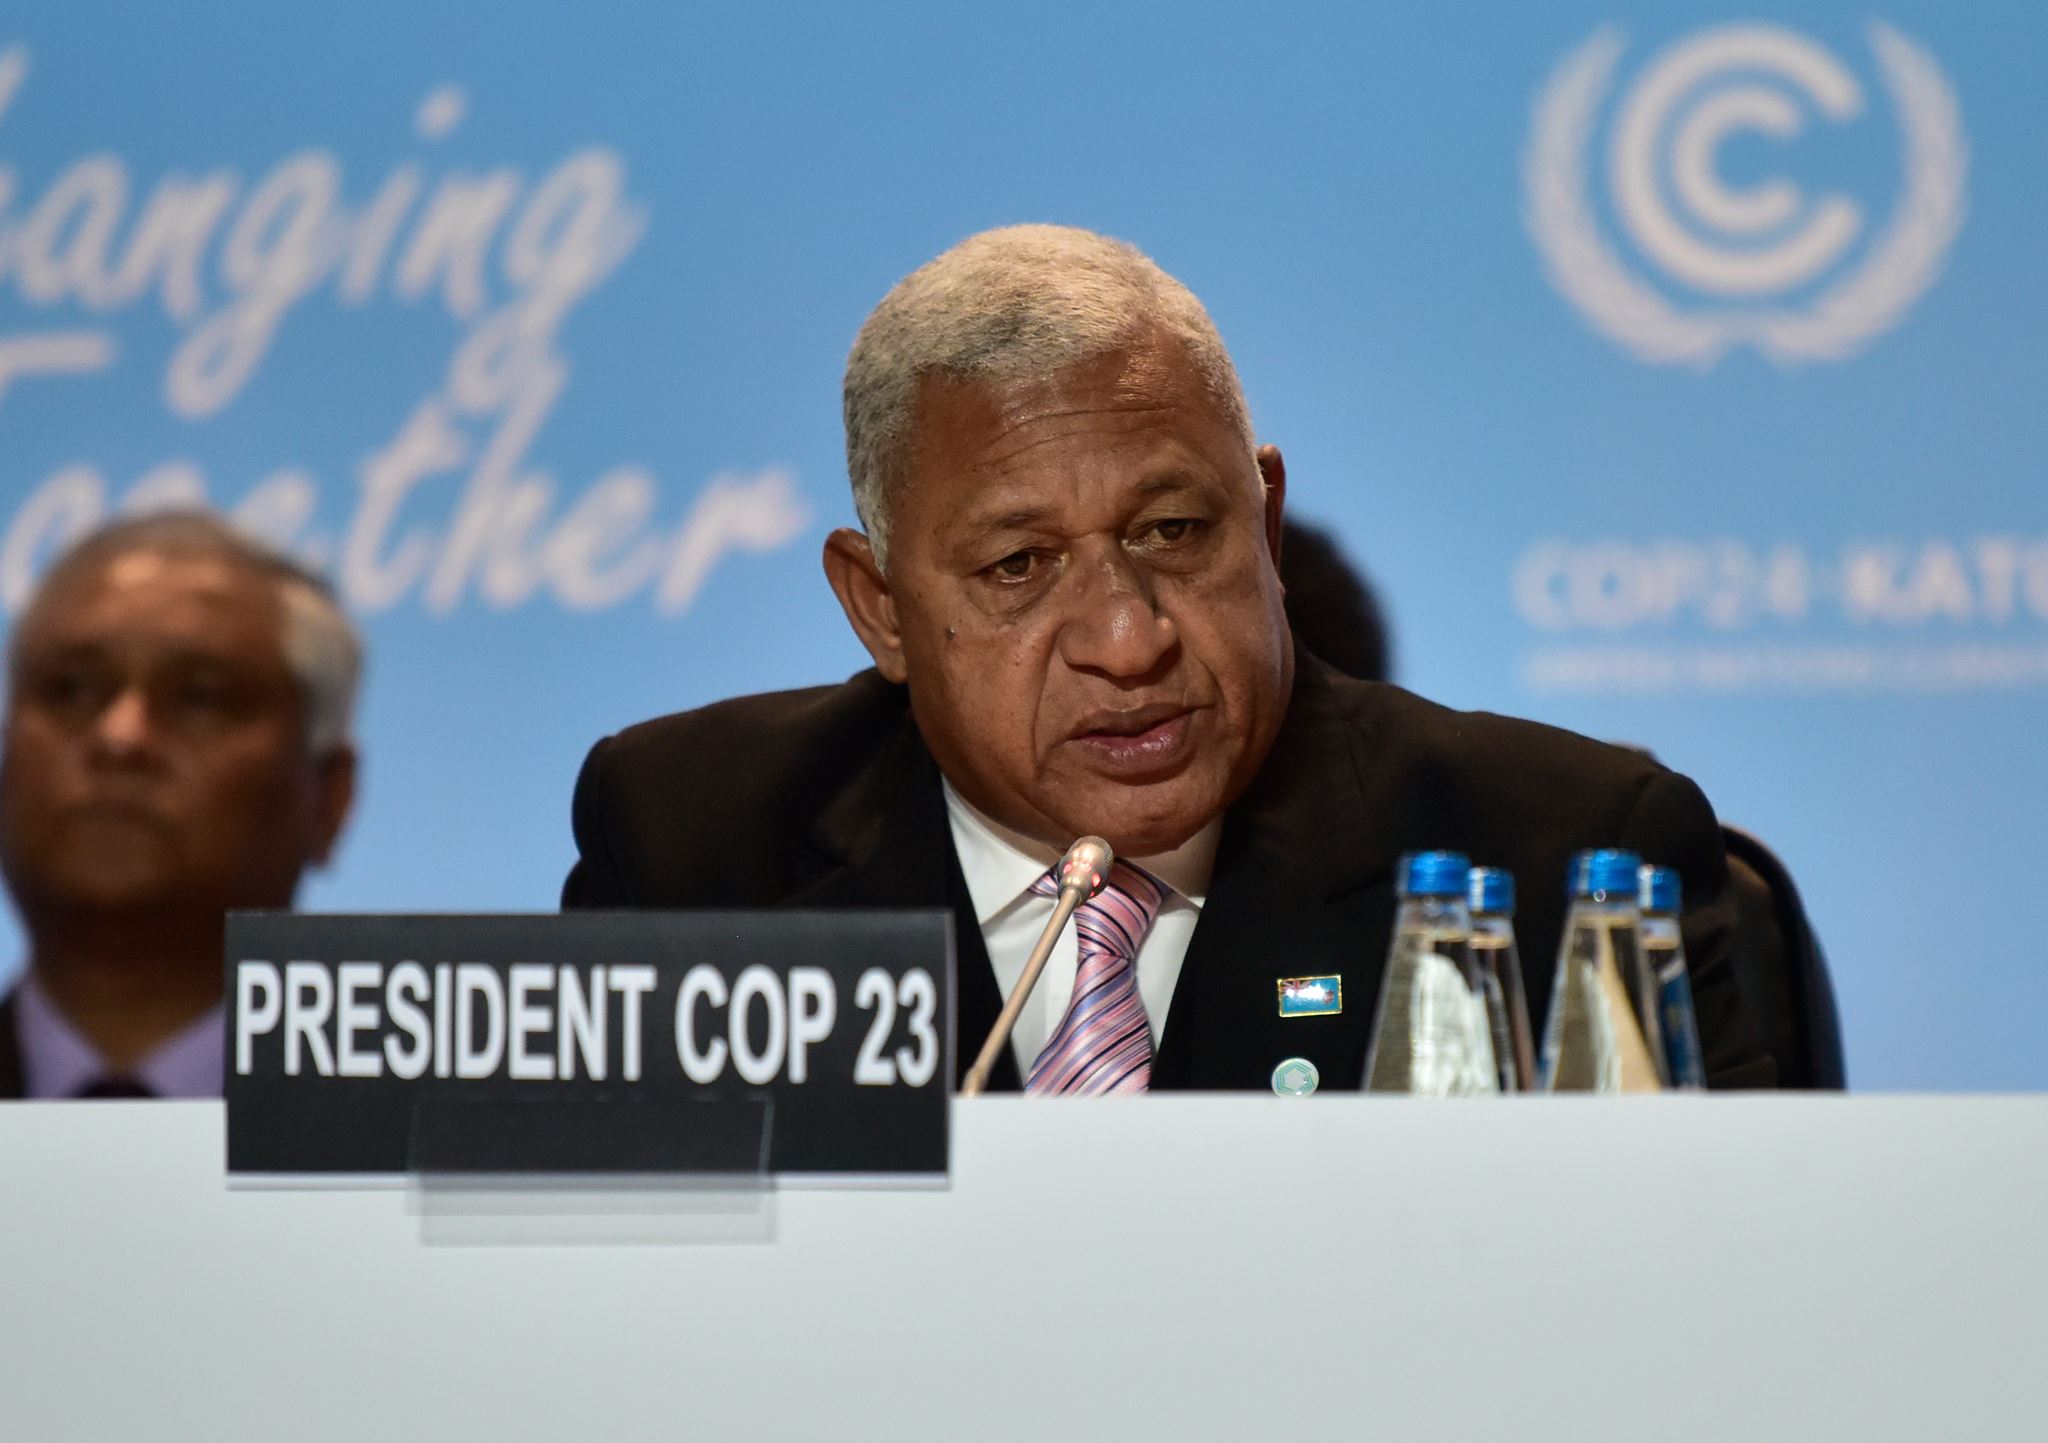 How successful was the Talanoa Dialogue in COP24?